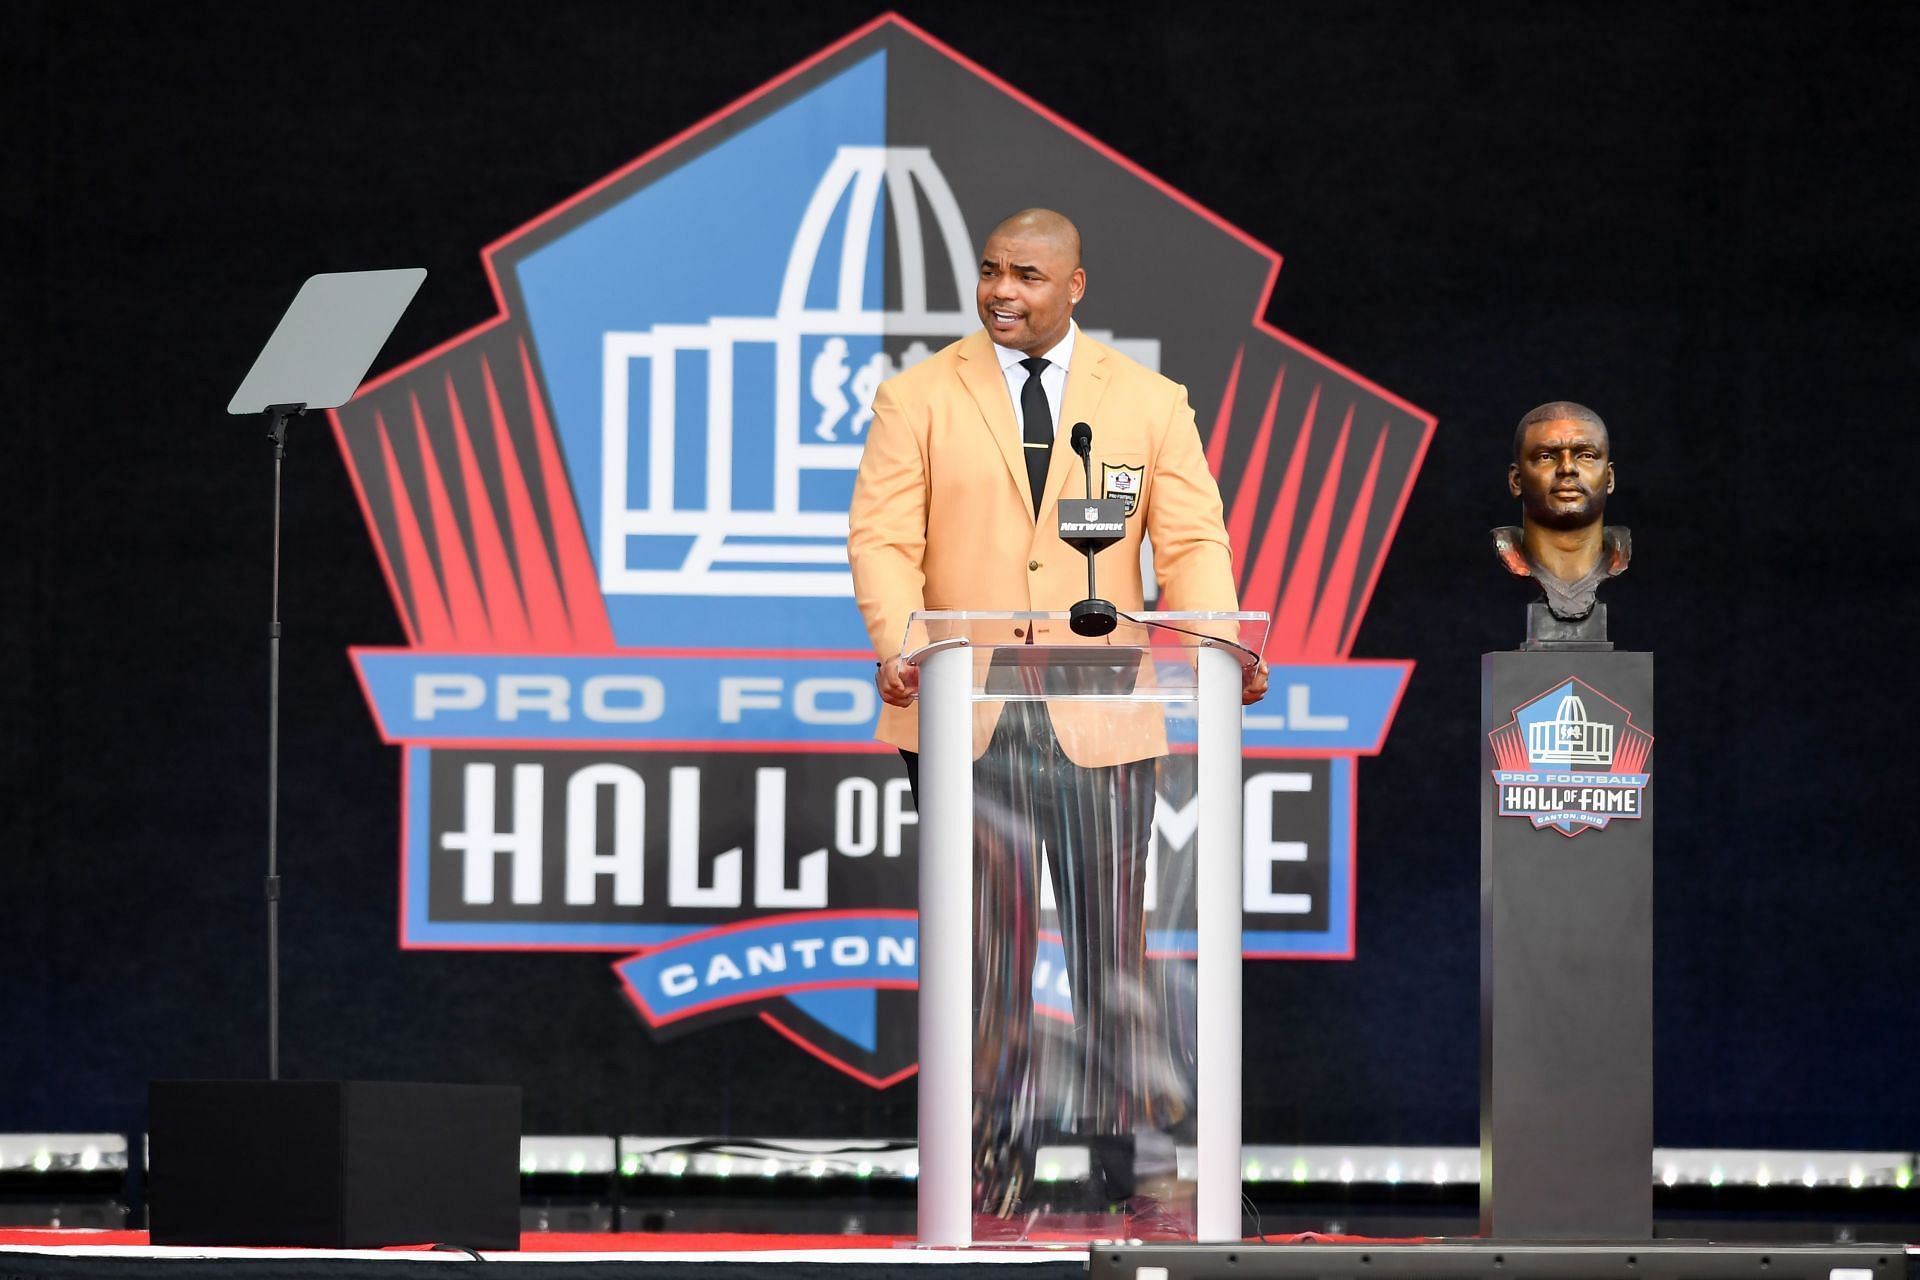 Richard Seymore delivers a speach during the NFL Hall of Fame Enshrinement Ceremony